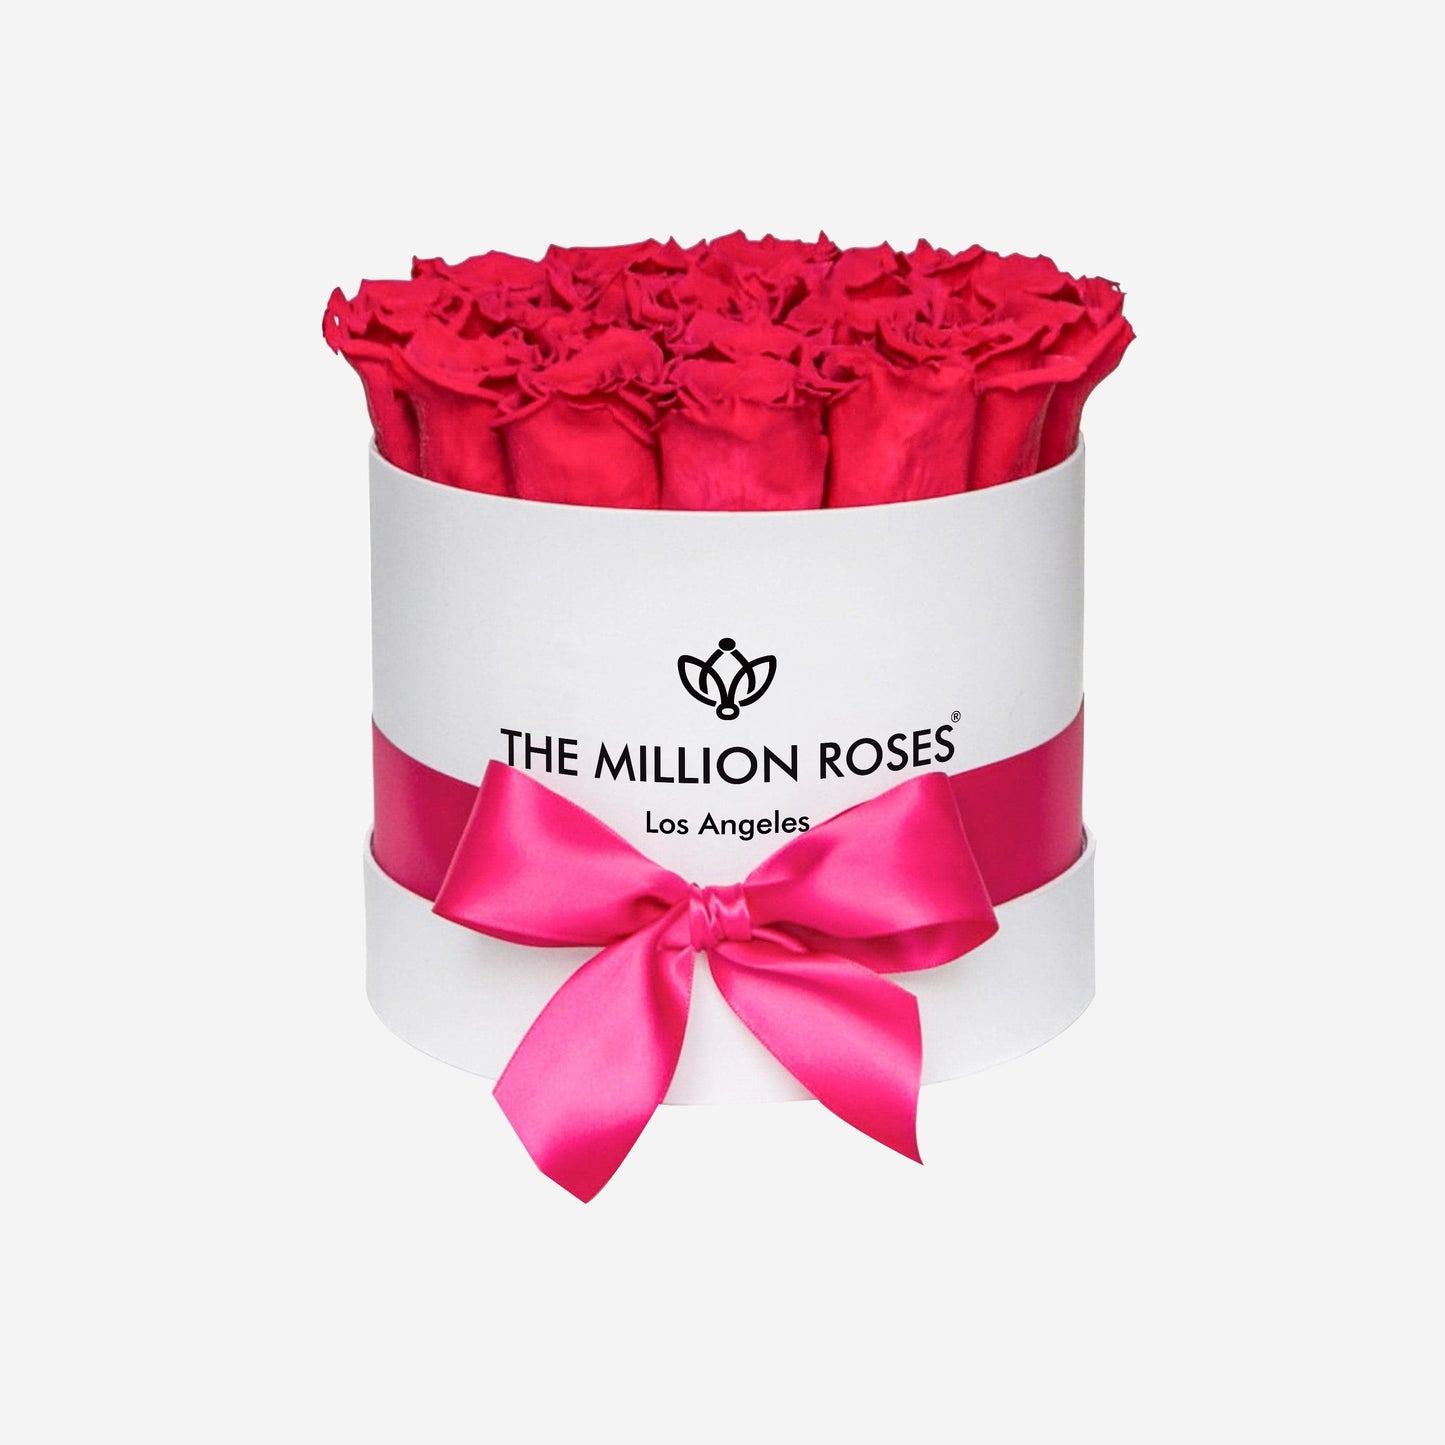 Classic White Box | Hot Pink Roses - The Million Roses